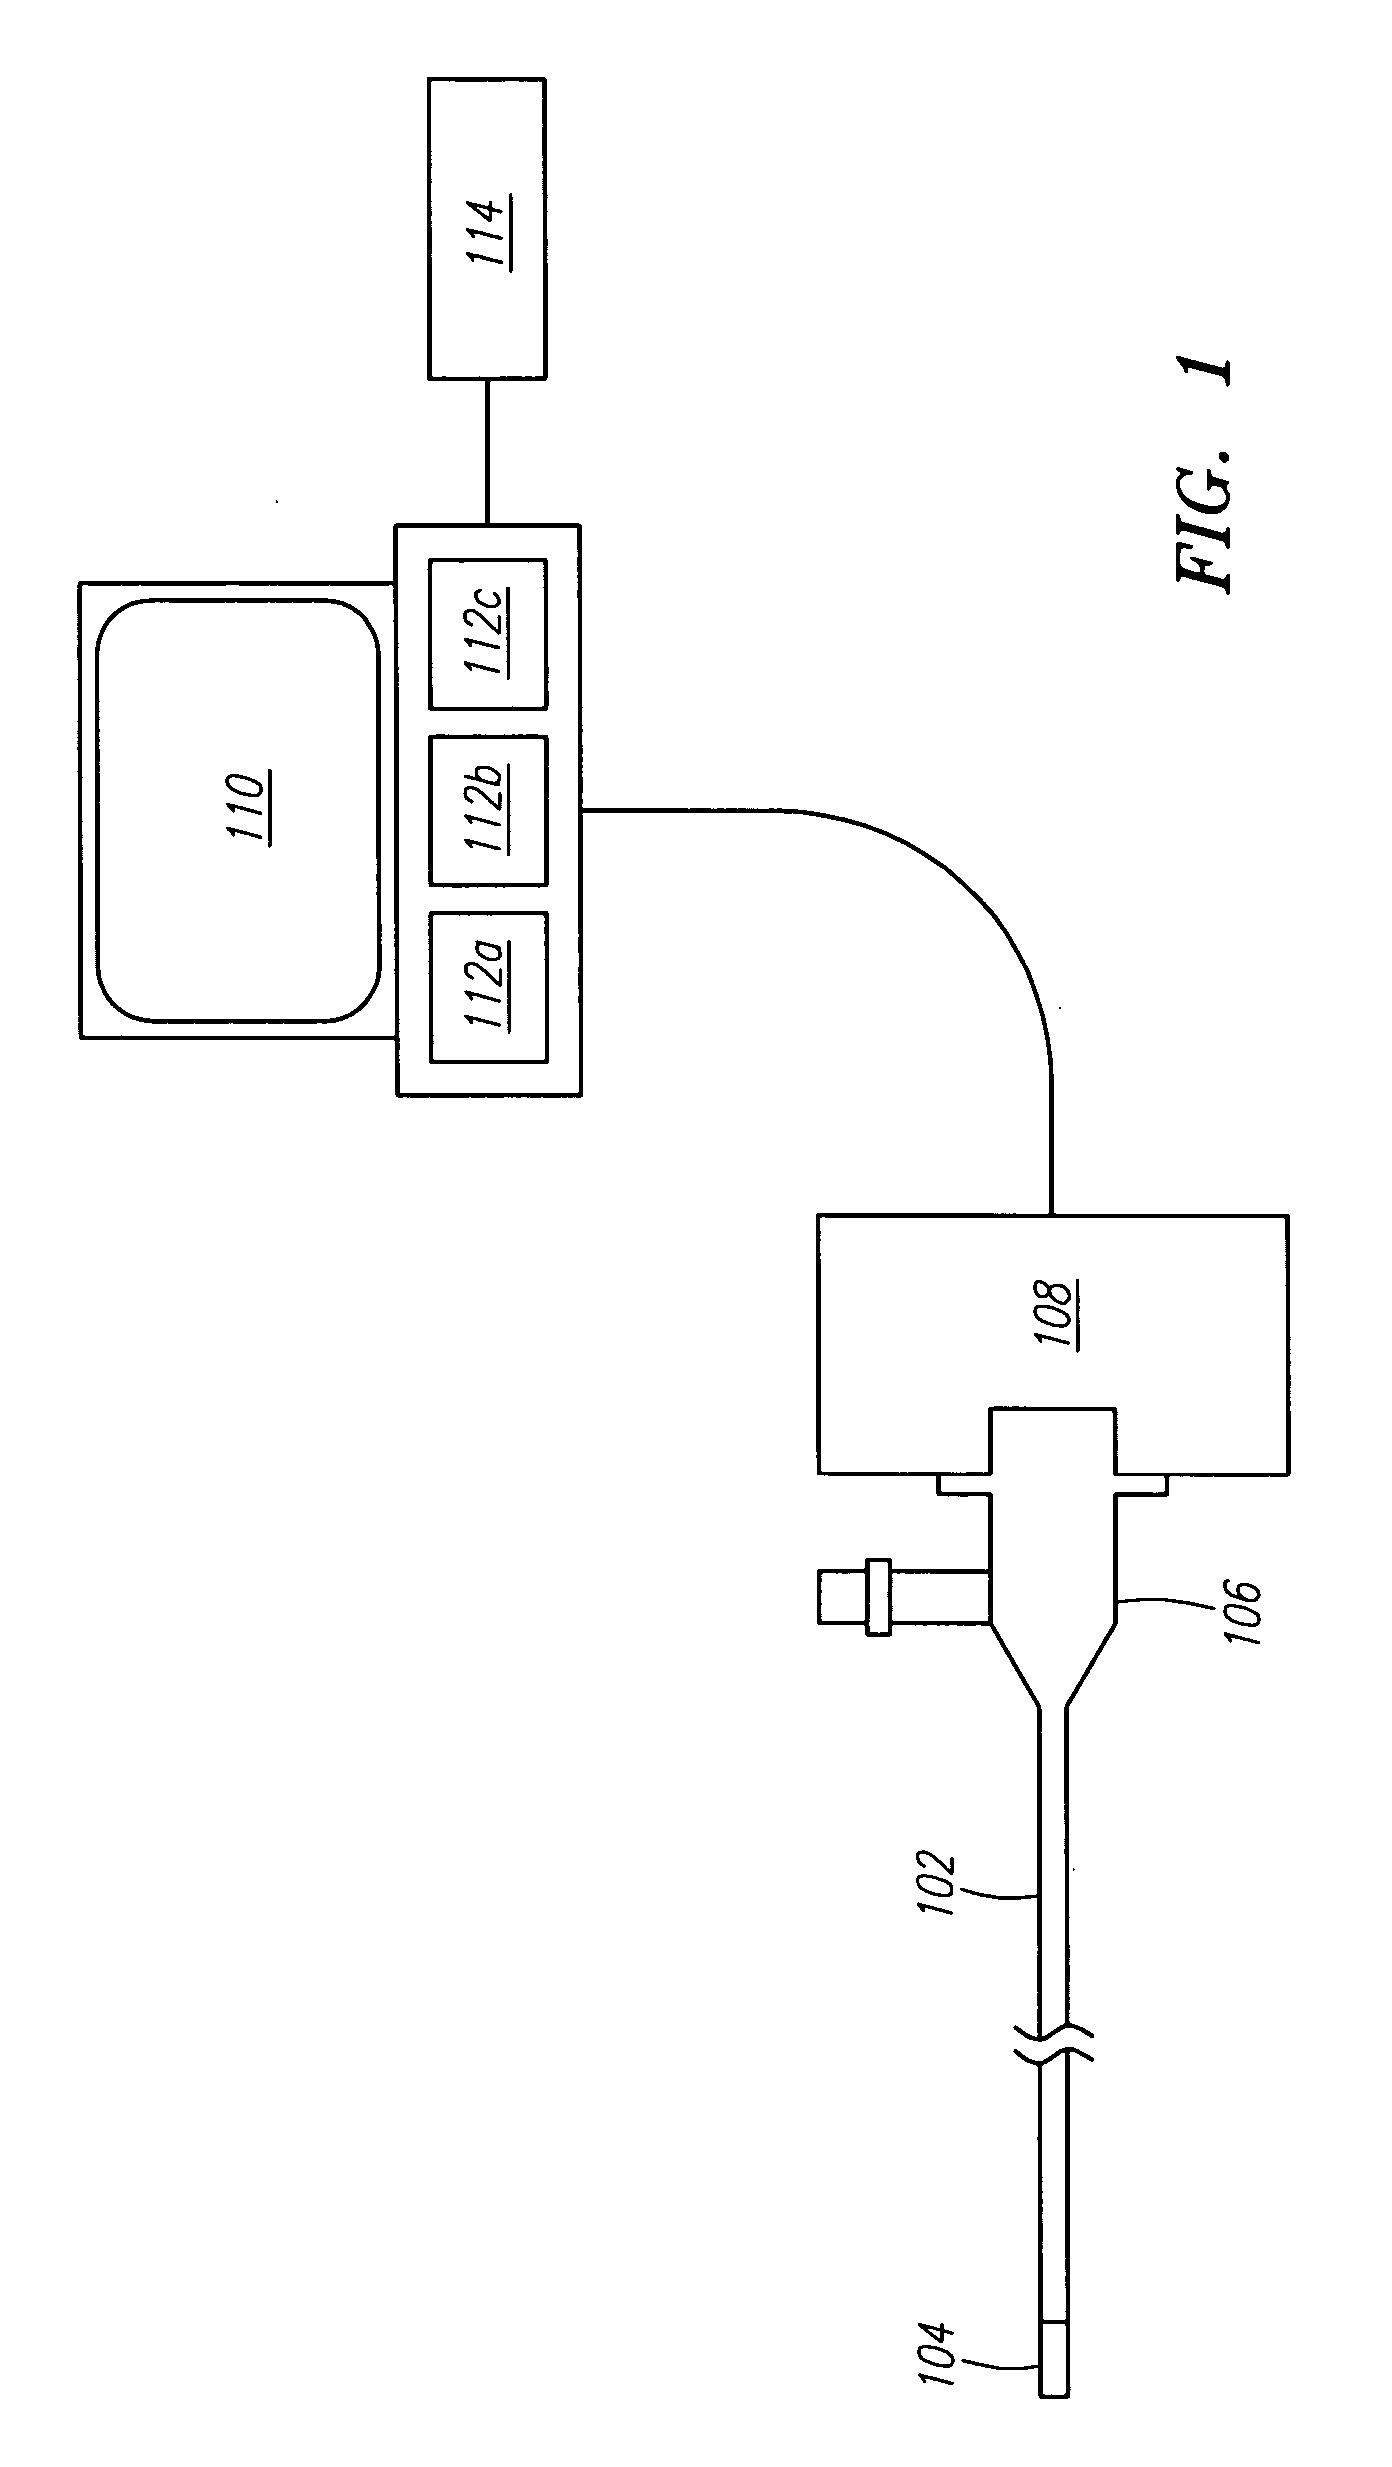 Apparatus and method for use of RFID catheter intelligence